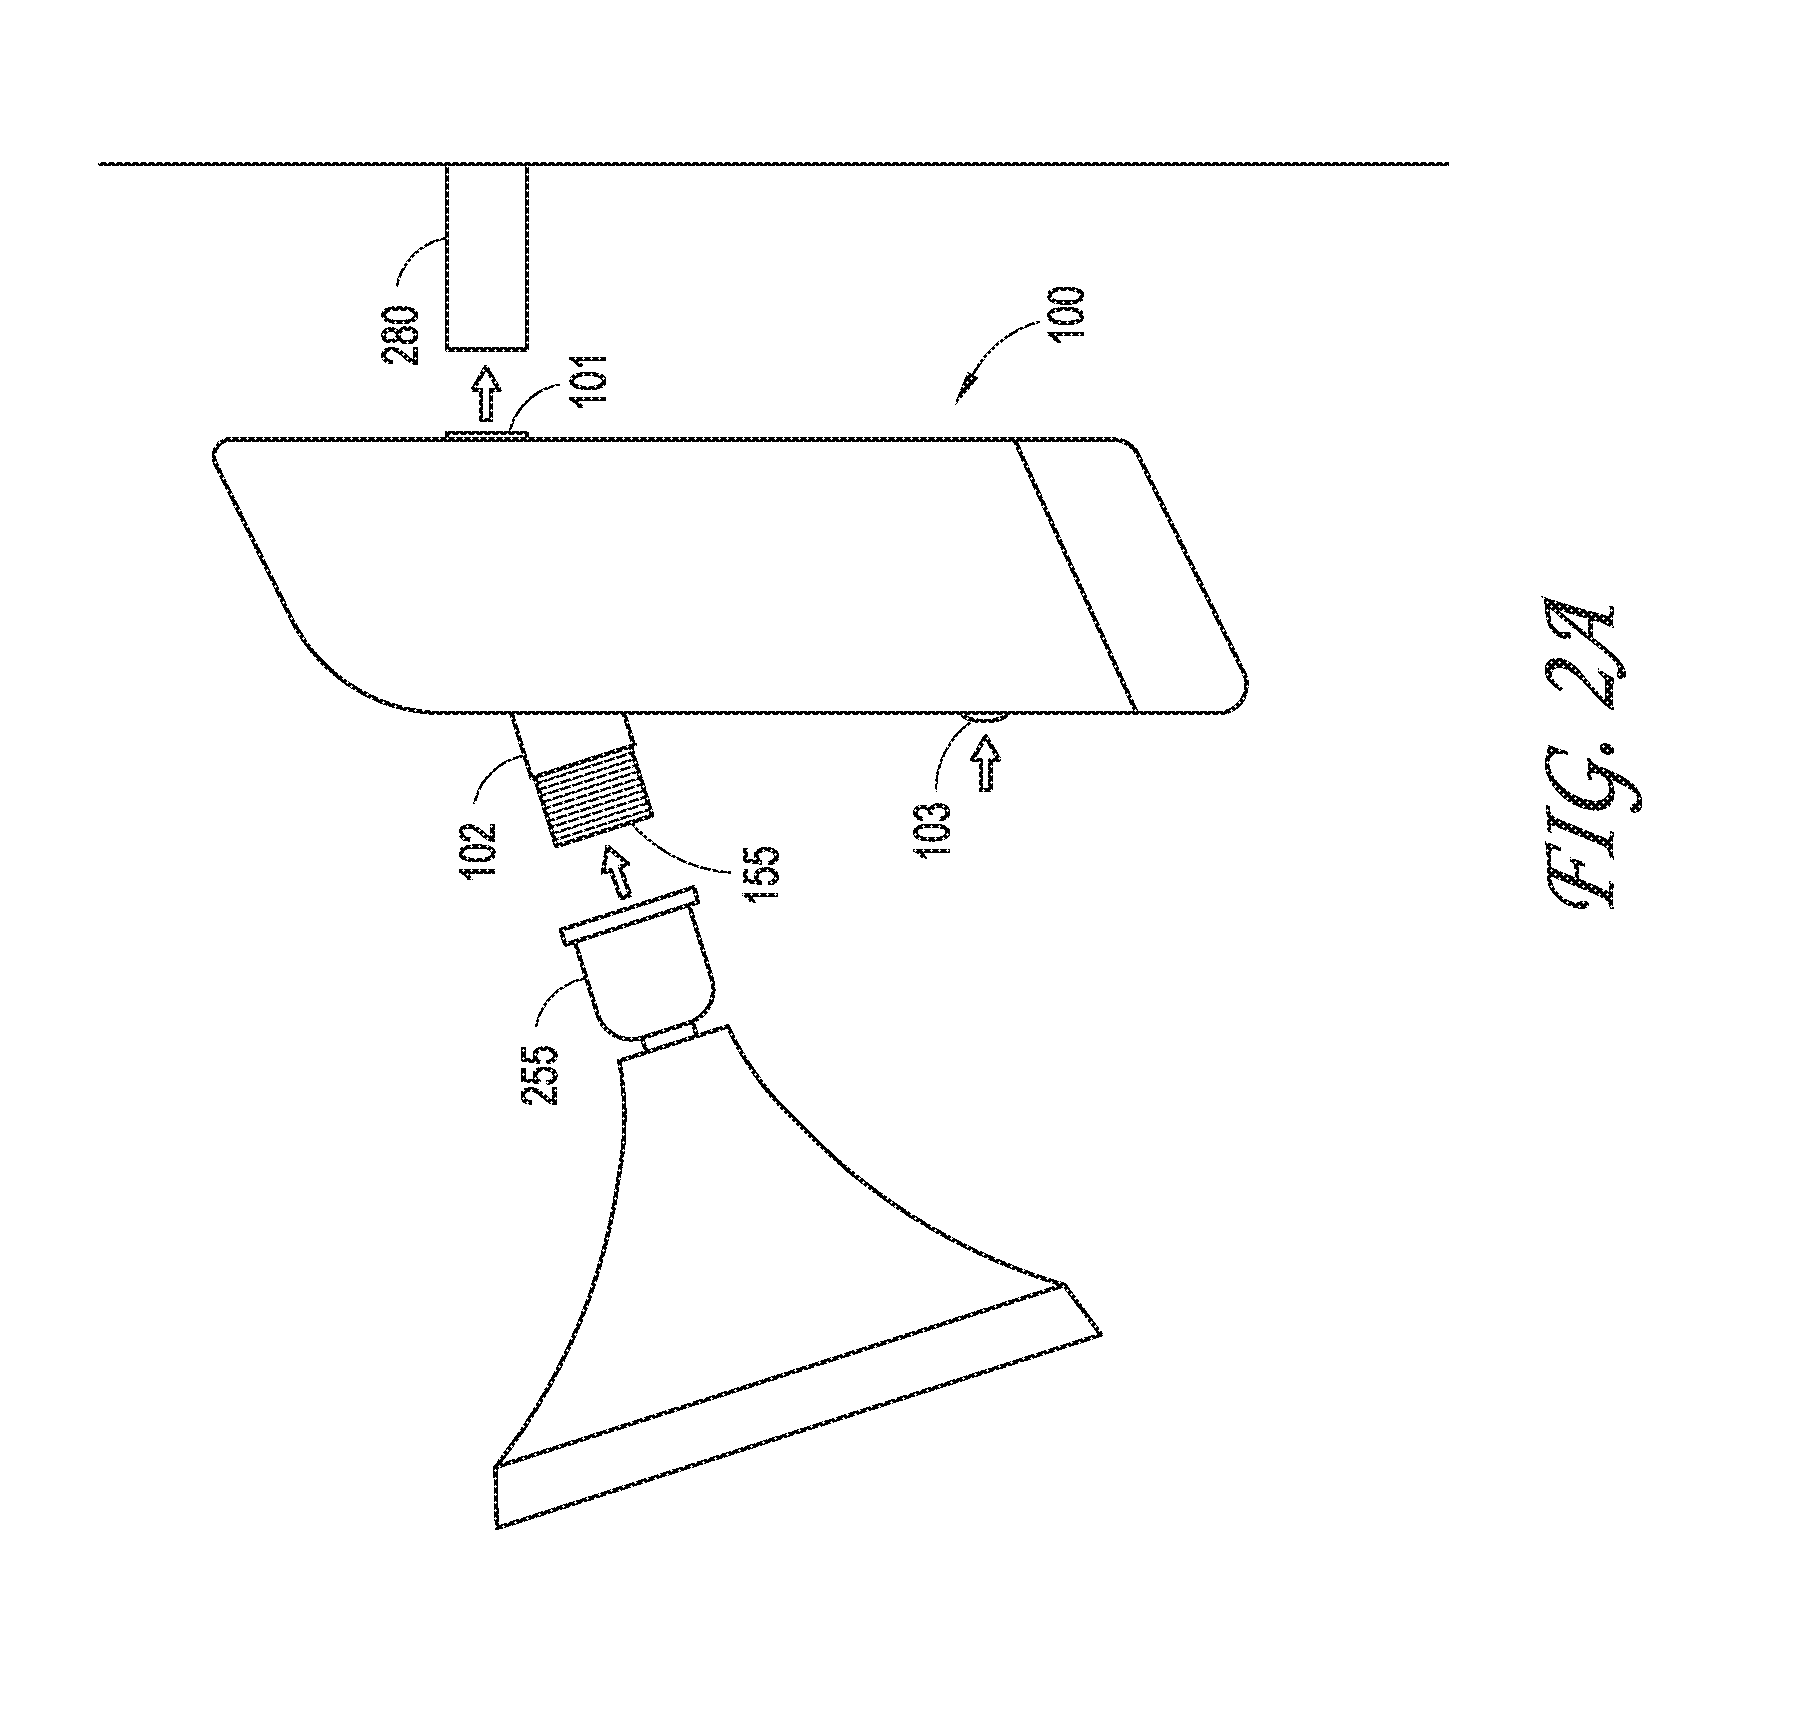 Systems and methods for controlling water flow